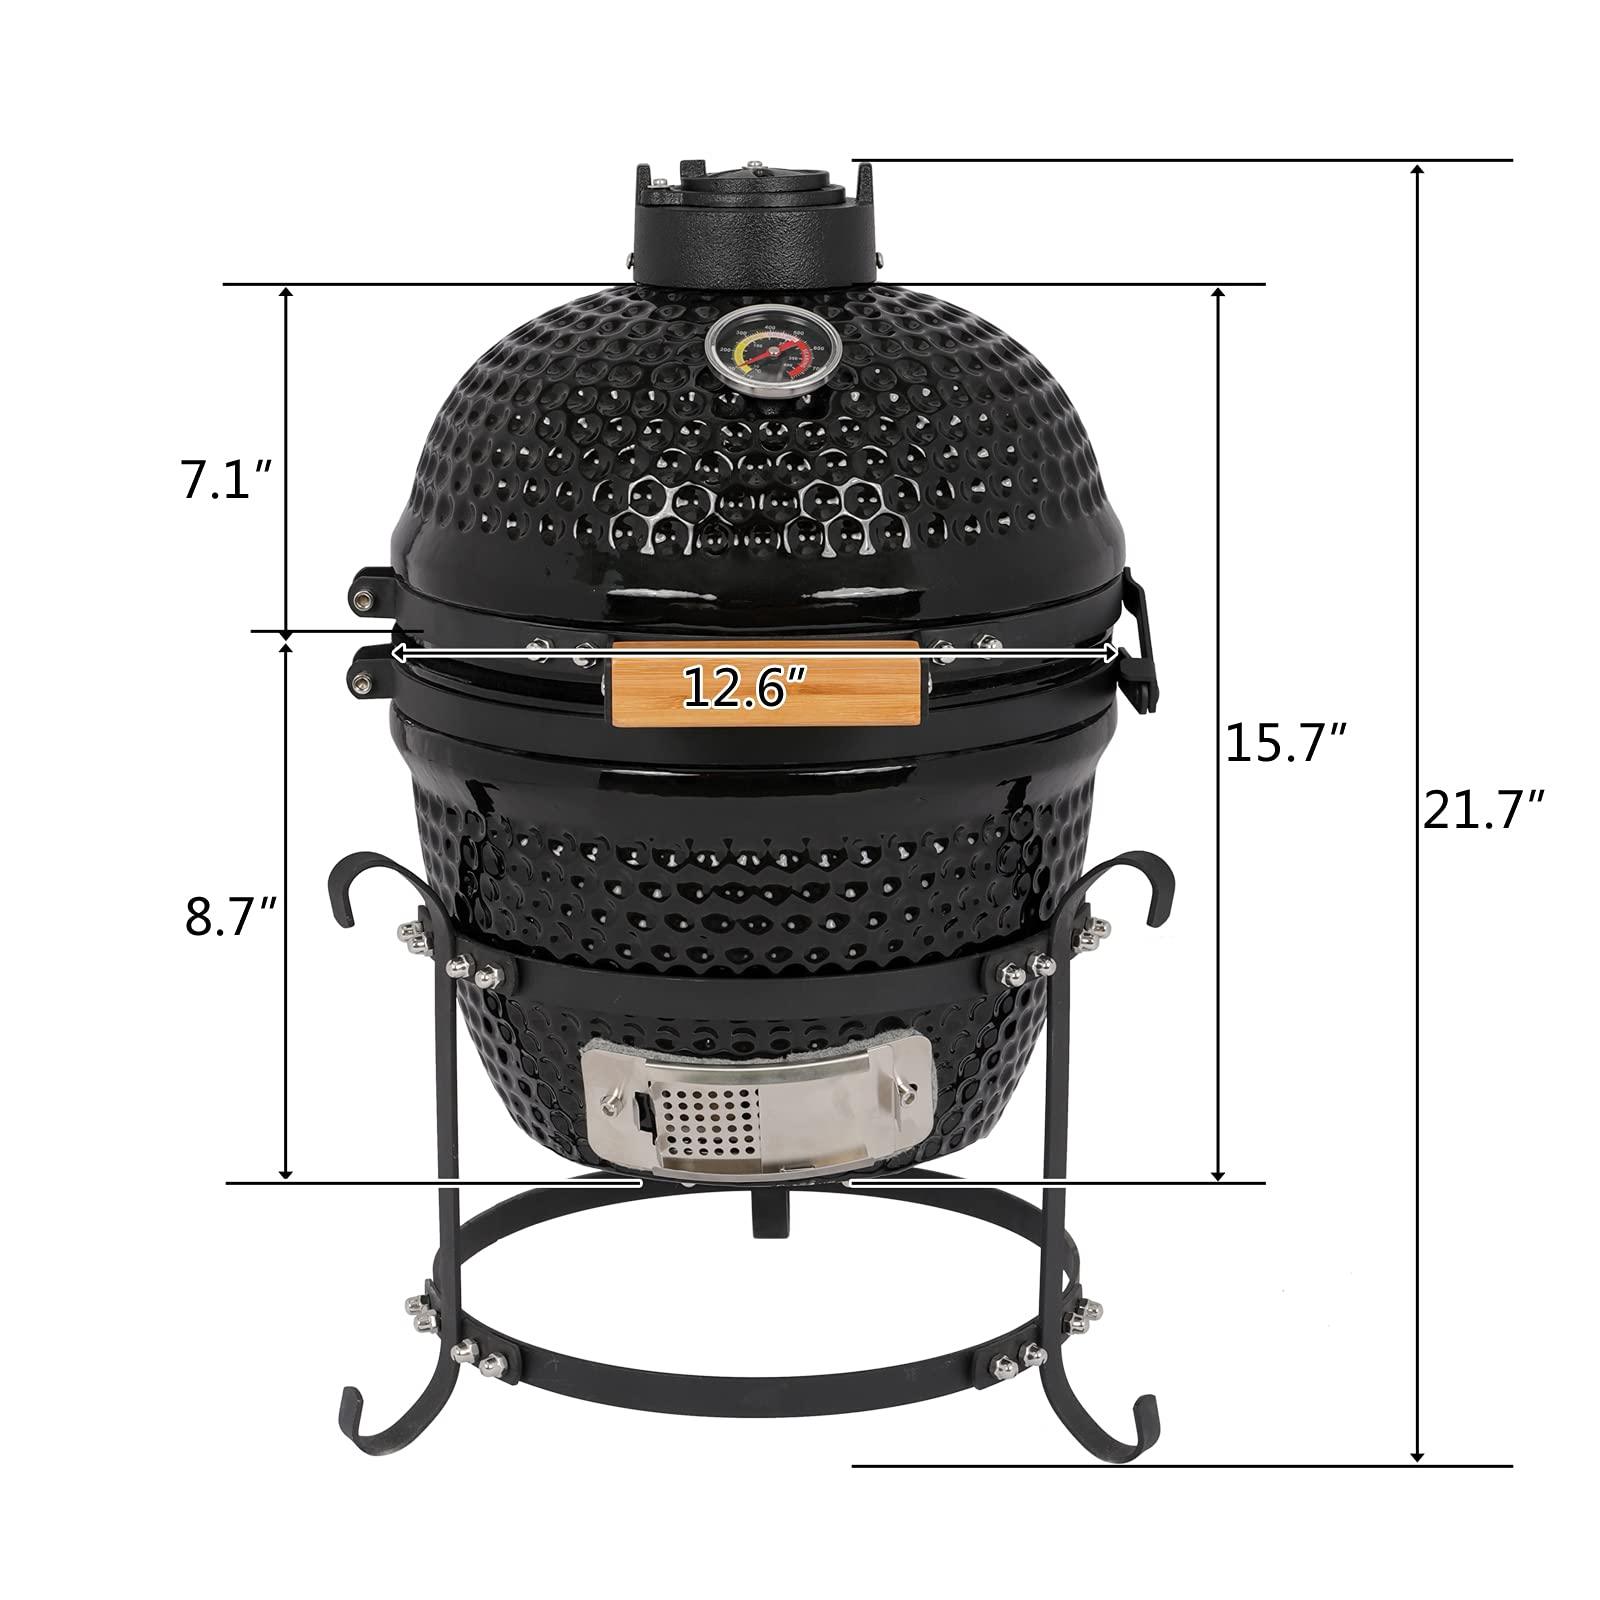 Vasitelan 13 inch Portable Ceramics Charcoal Grill,Kamado BBQ Charcoal Grill (Style 2-Black) - CookCave